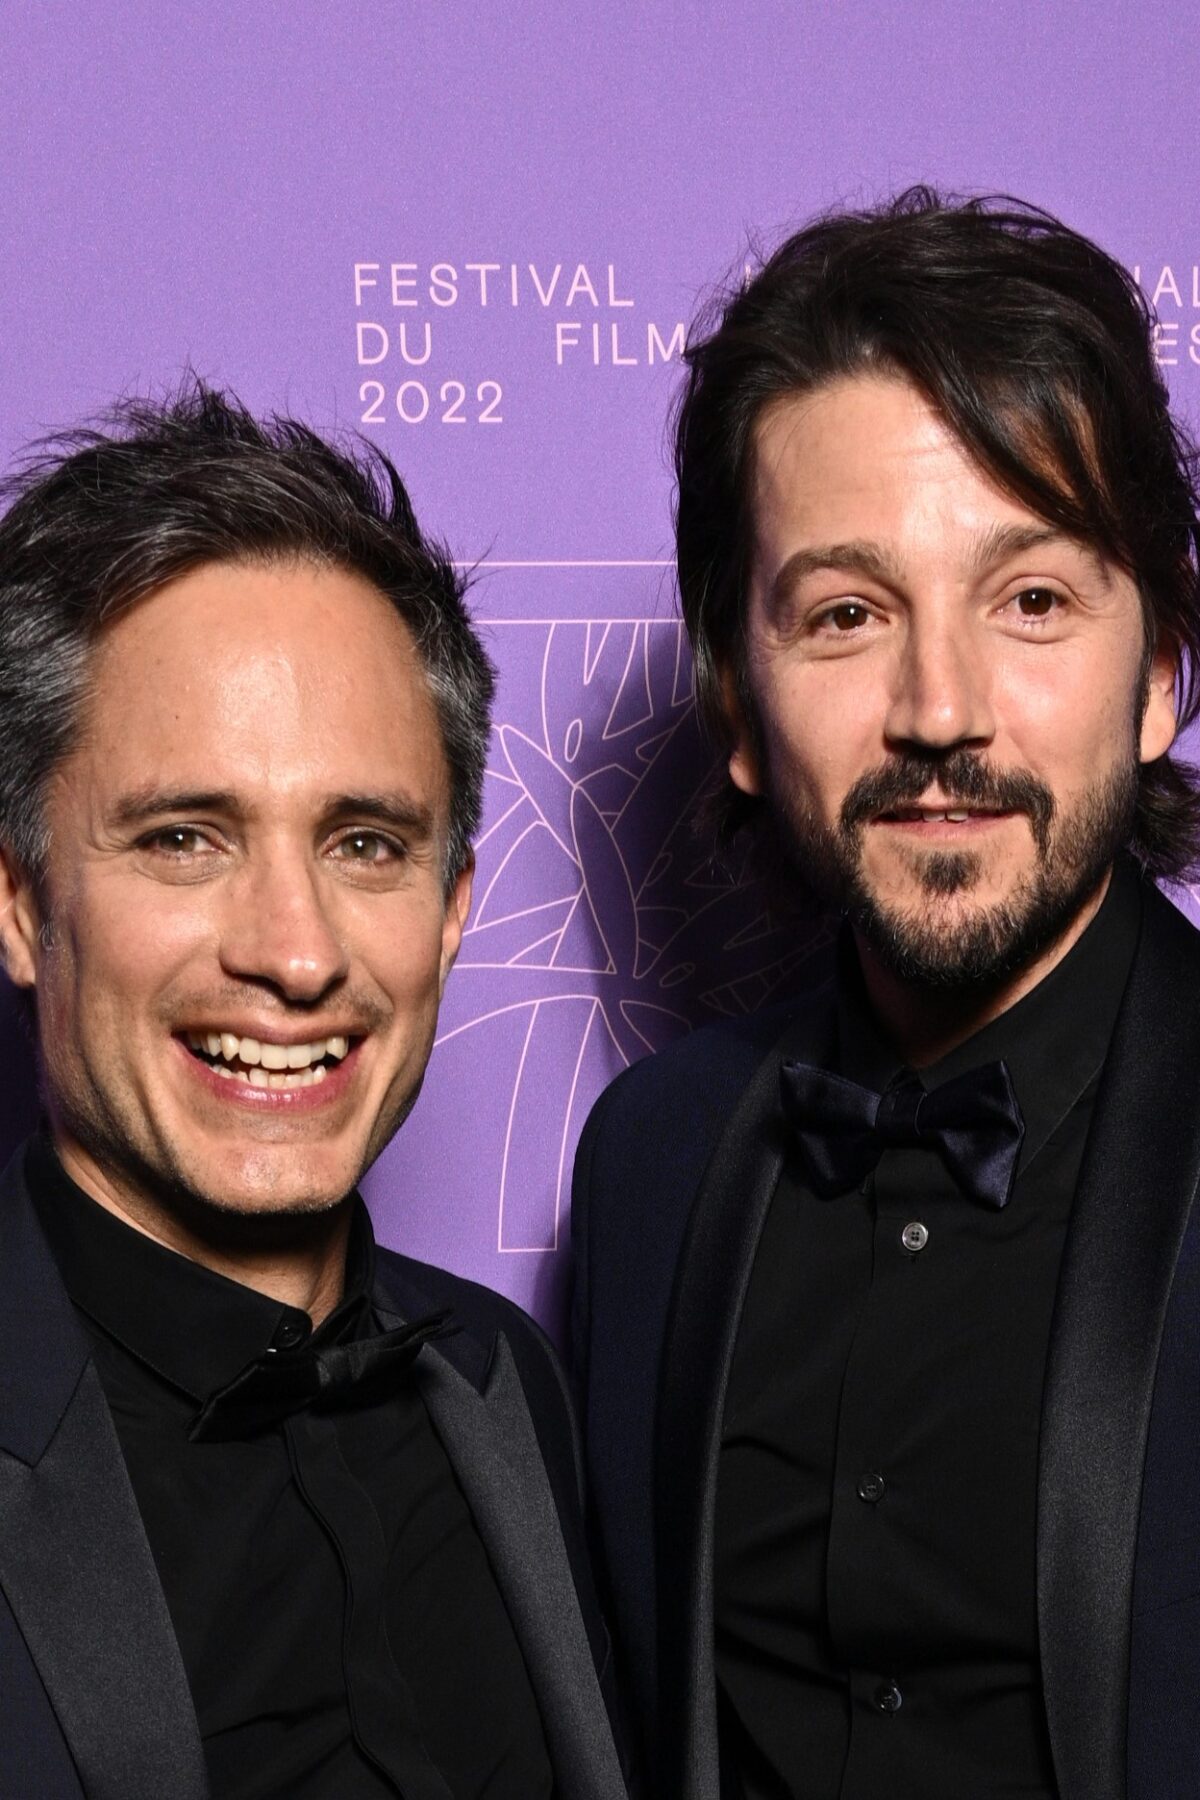 CANNES, FRANCE - MAY 24: Gael García Bernal and Diego Luna attend the 